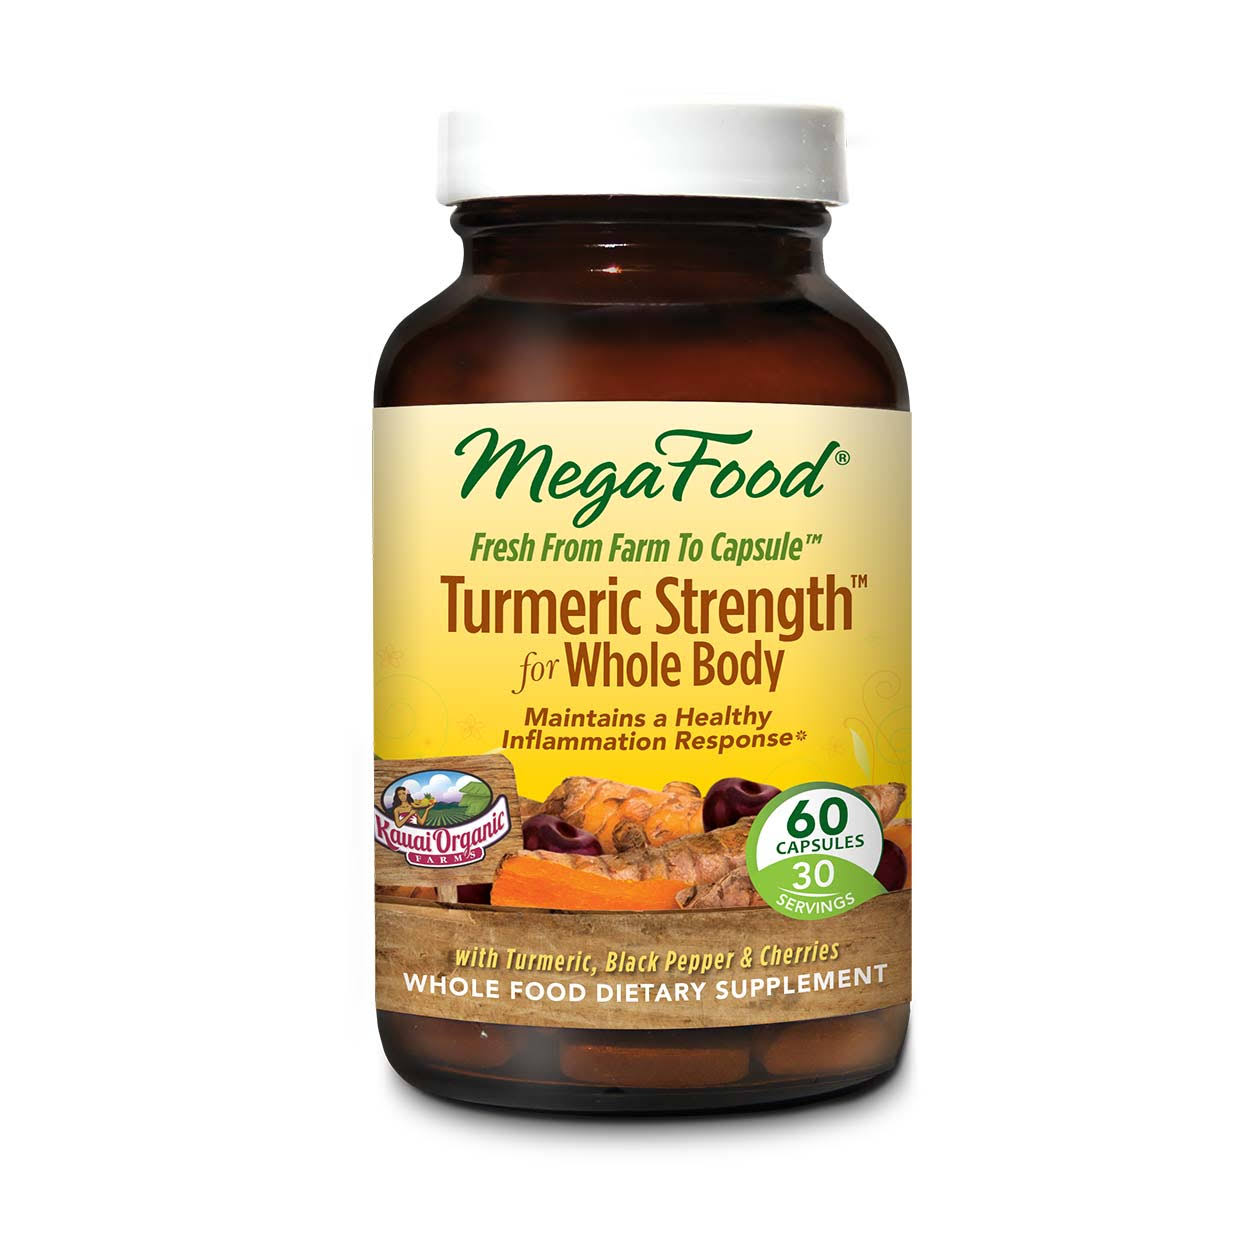 MegaFood Turmeric Strength for Whole Body Dietary Supplement - 60 Tablets